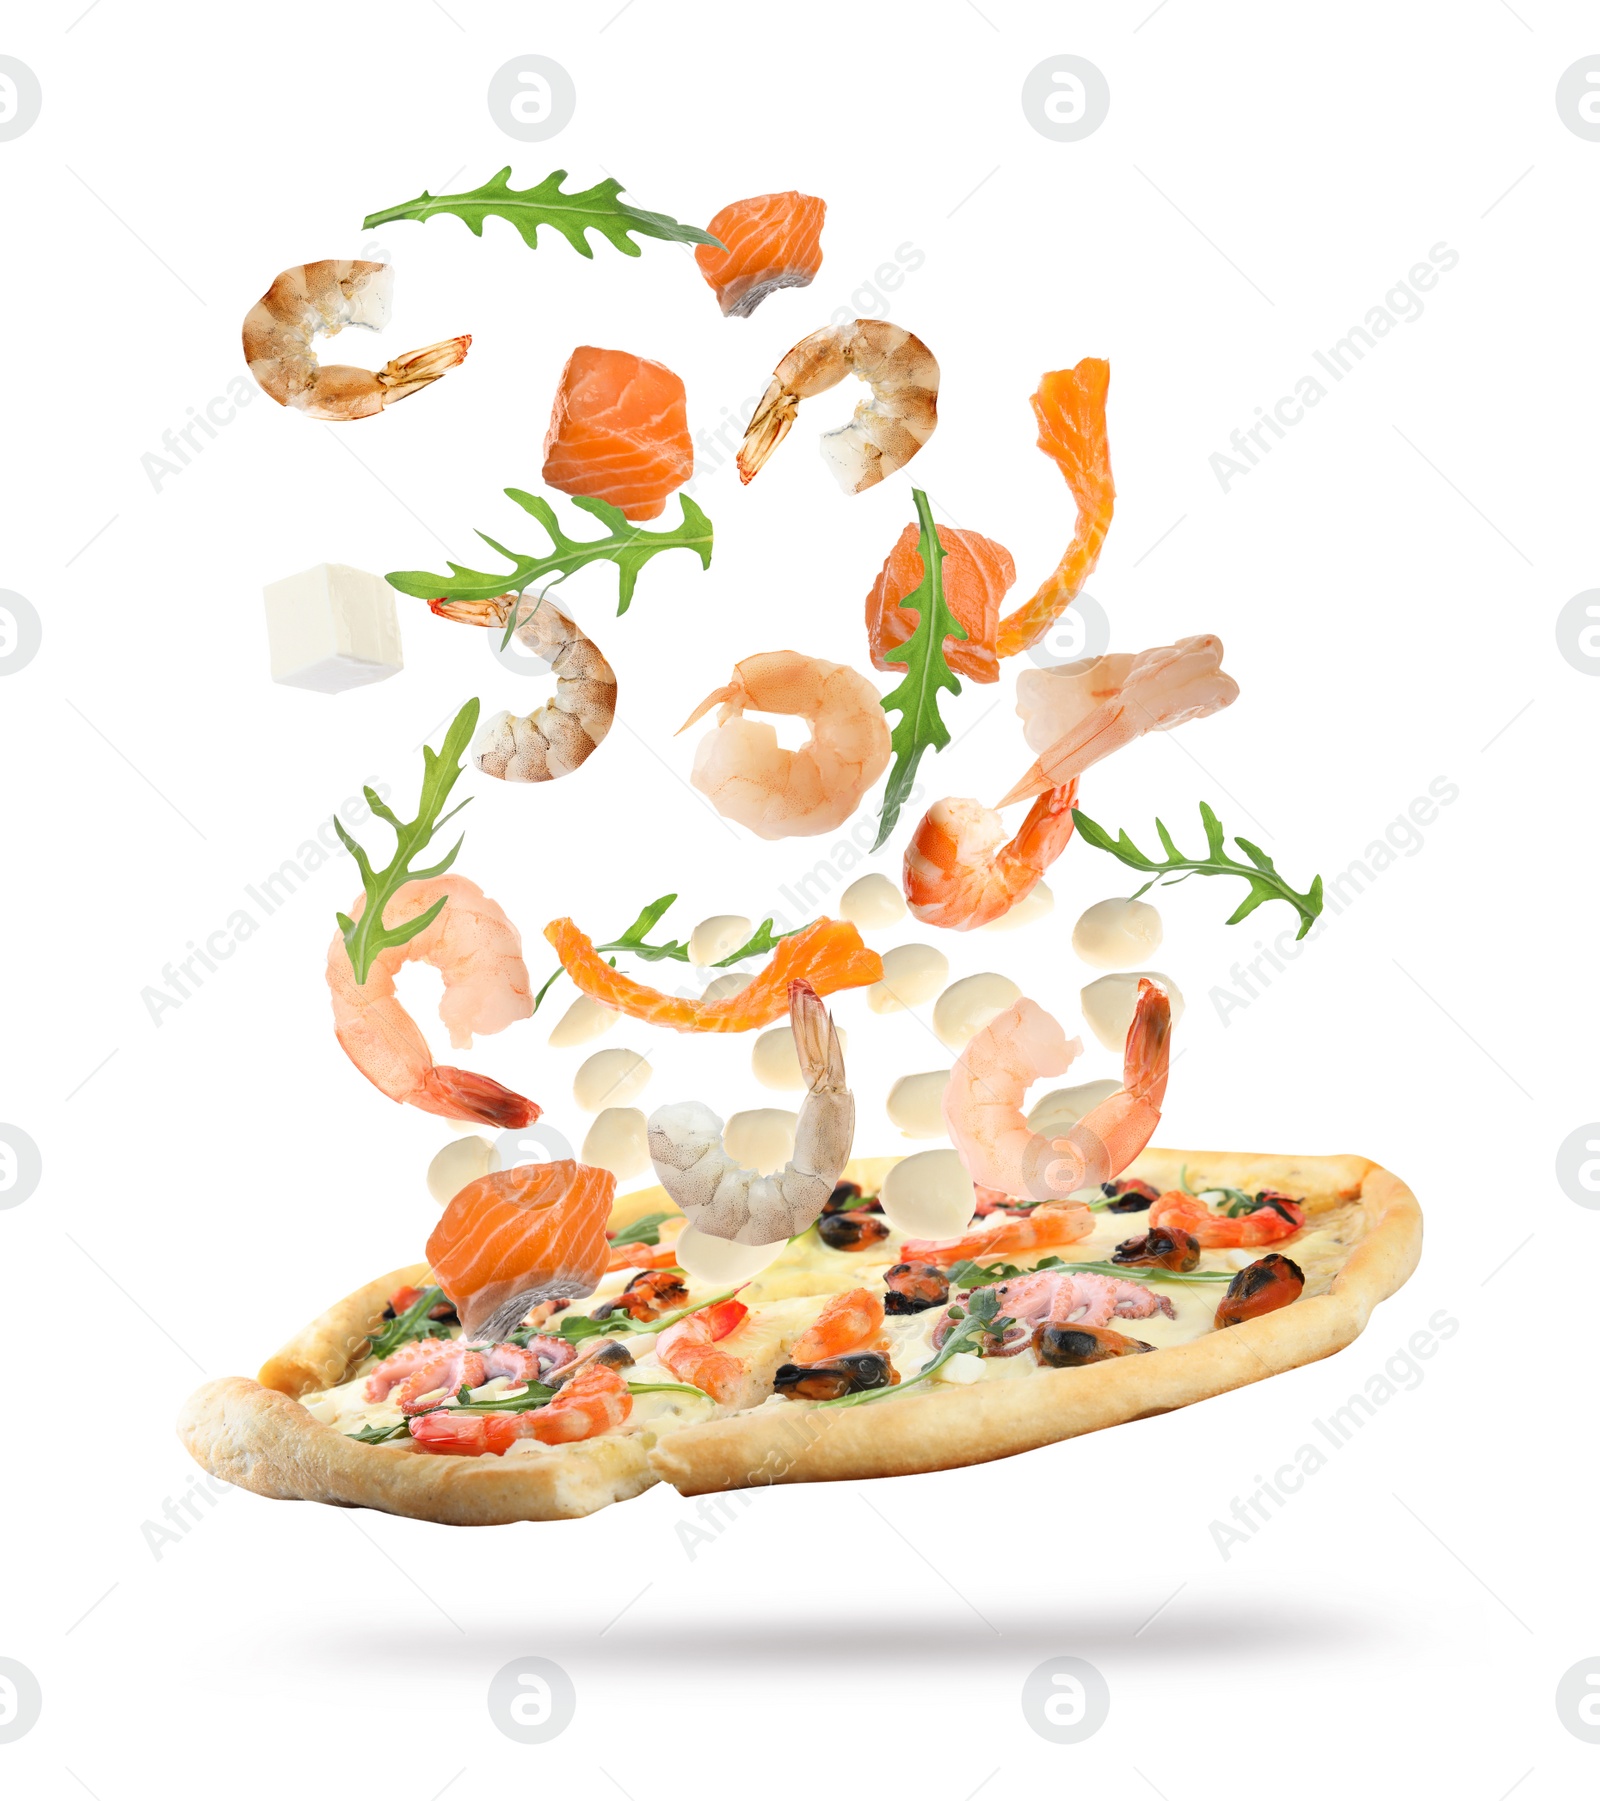 Image of Delicious pizza with flying ingredients on white background